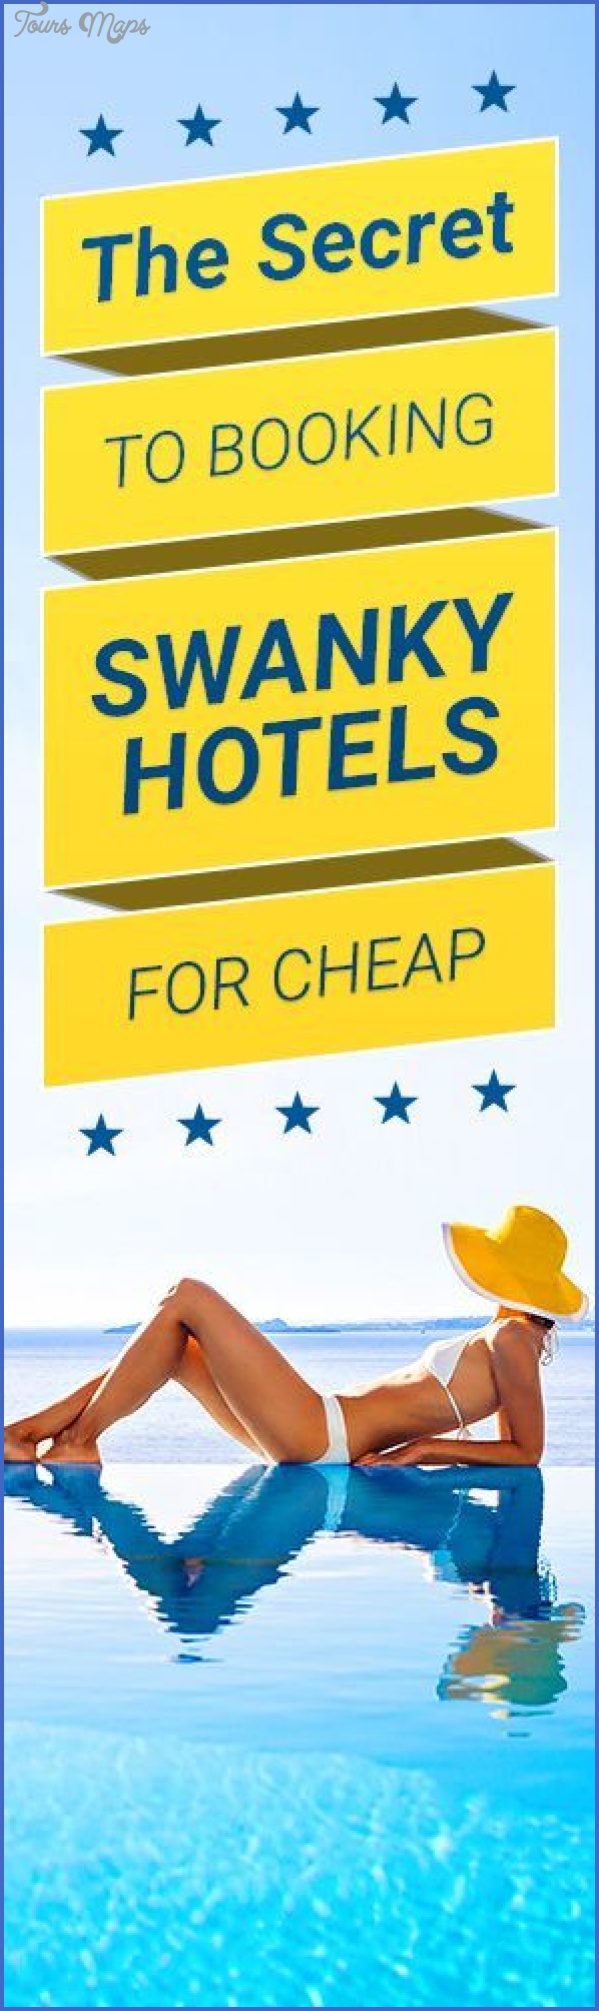 the secret to hotel discounts for travel 10 THE SECRET TO HOTEL DISCOUNTS FOR TRAVEL